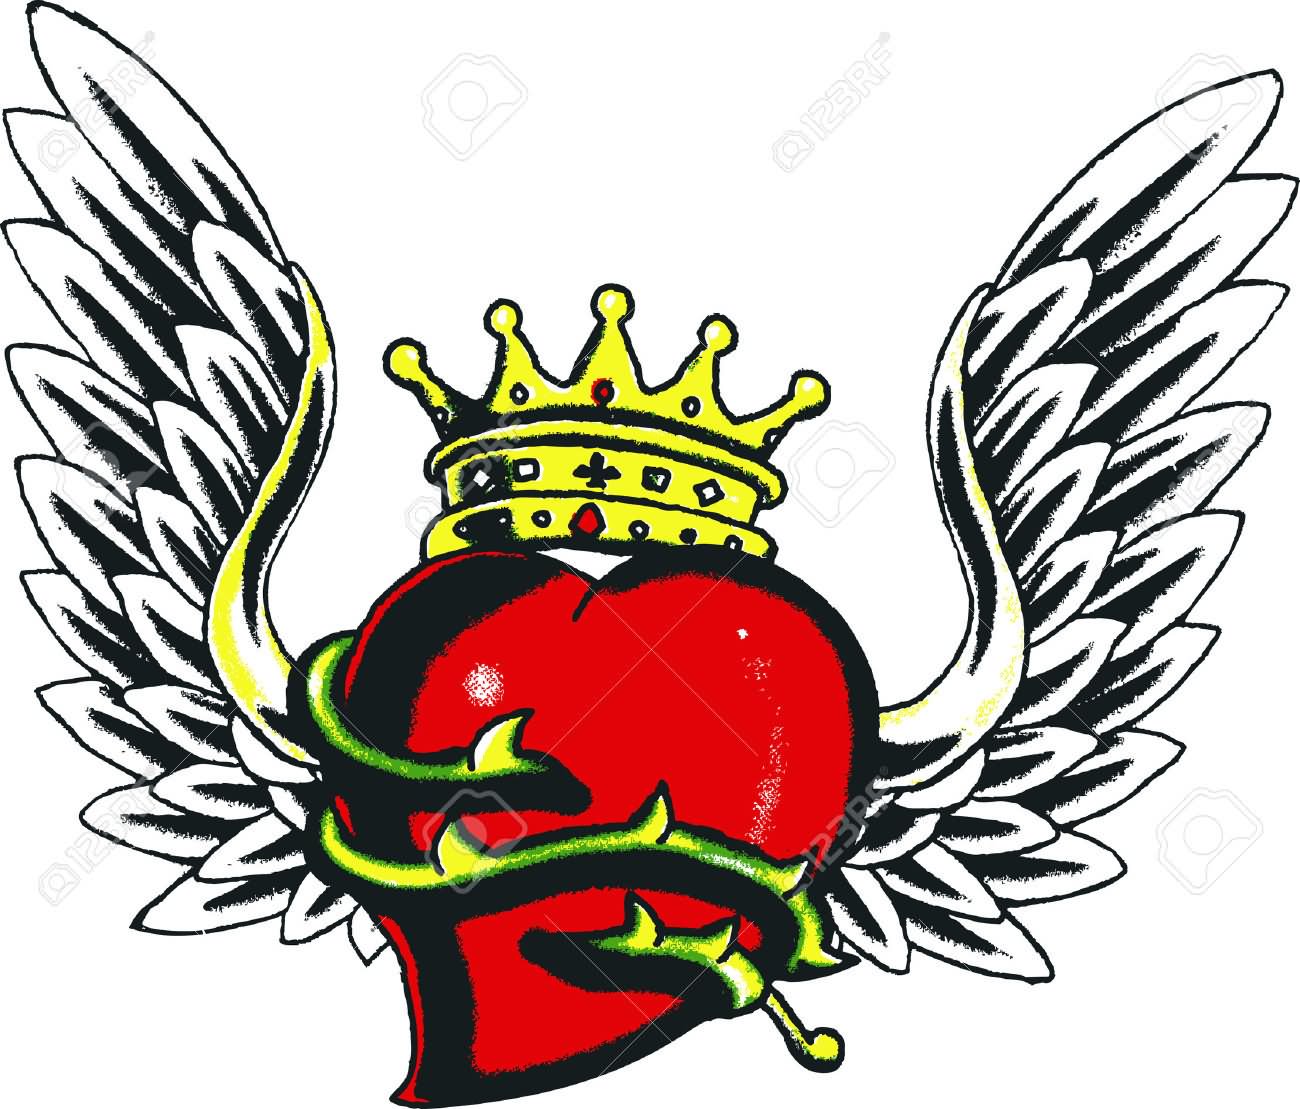 Crown On Gothic Heart With Wings Tattoo Design